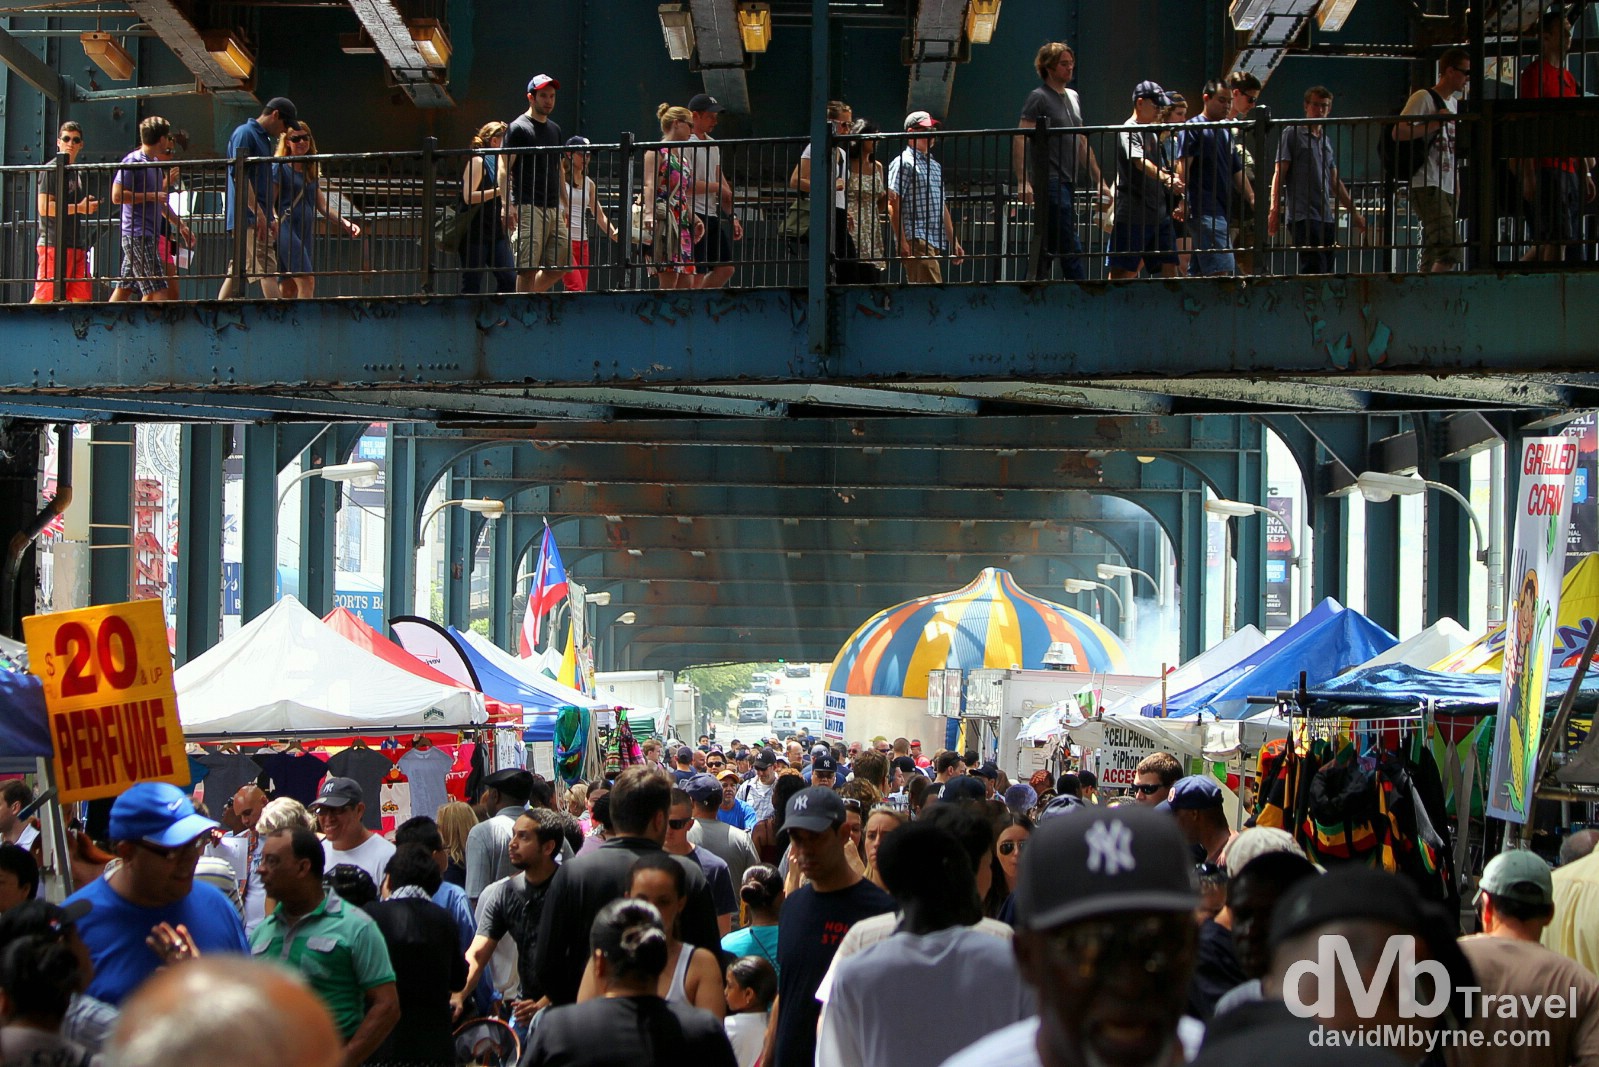 Game day carnival atmosphere on River Avenue, The Bronx, New York, USA. July 13th 2013.